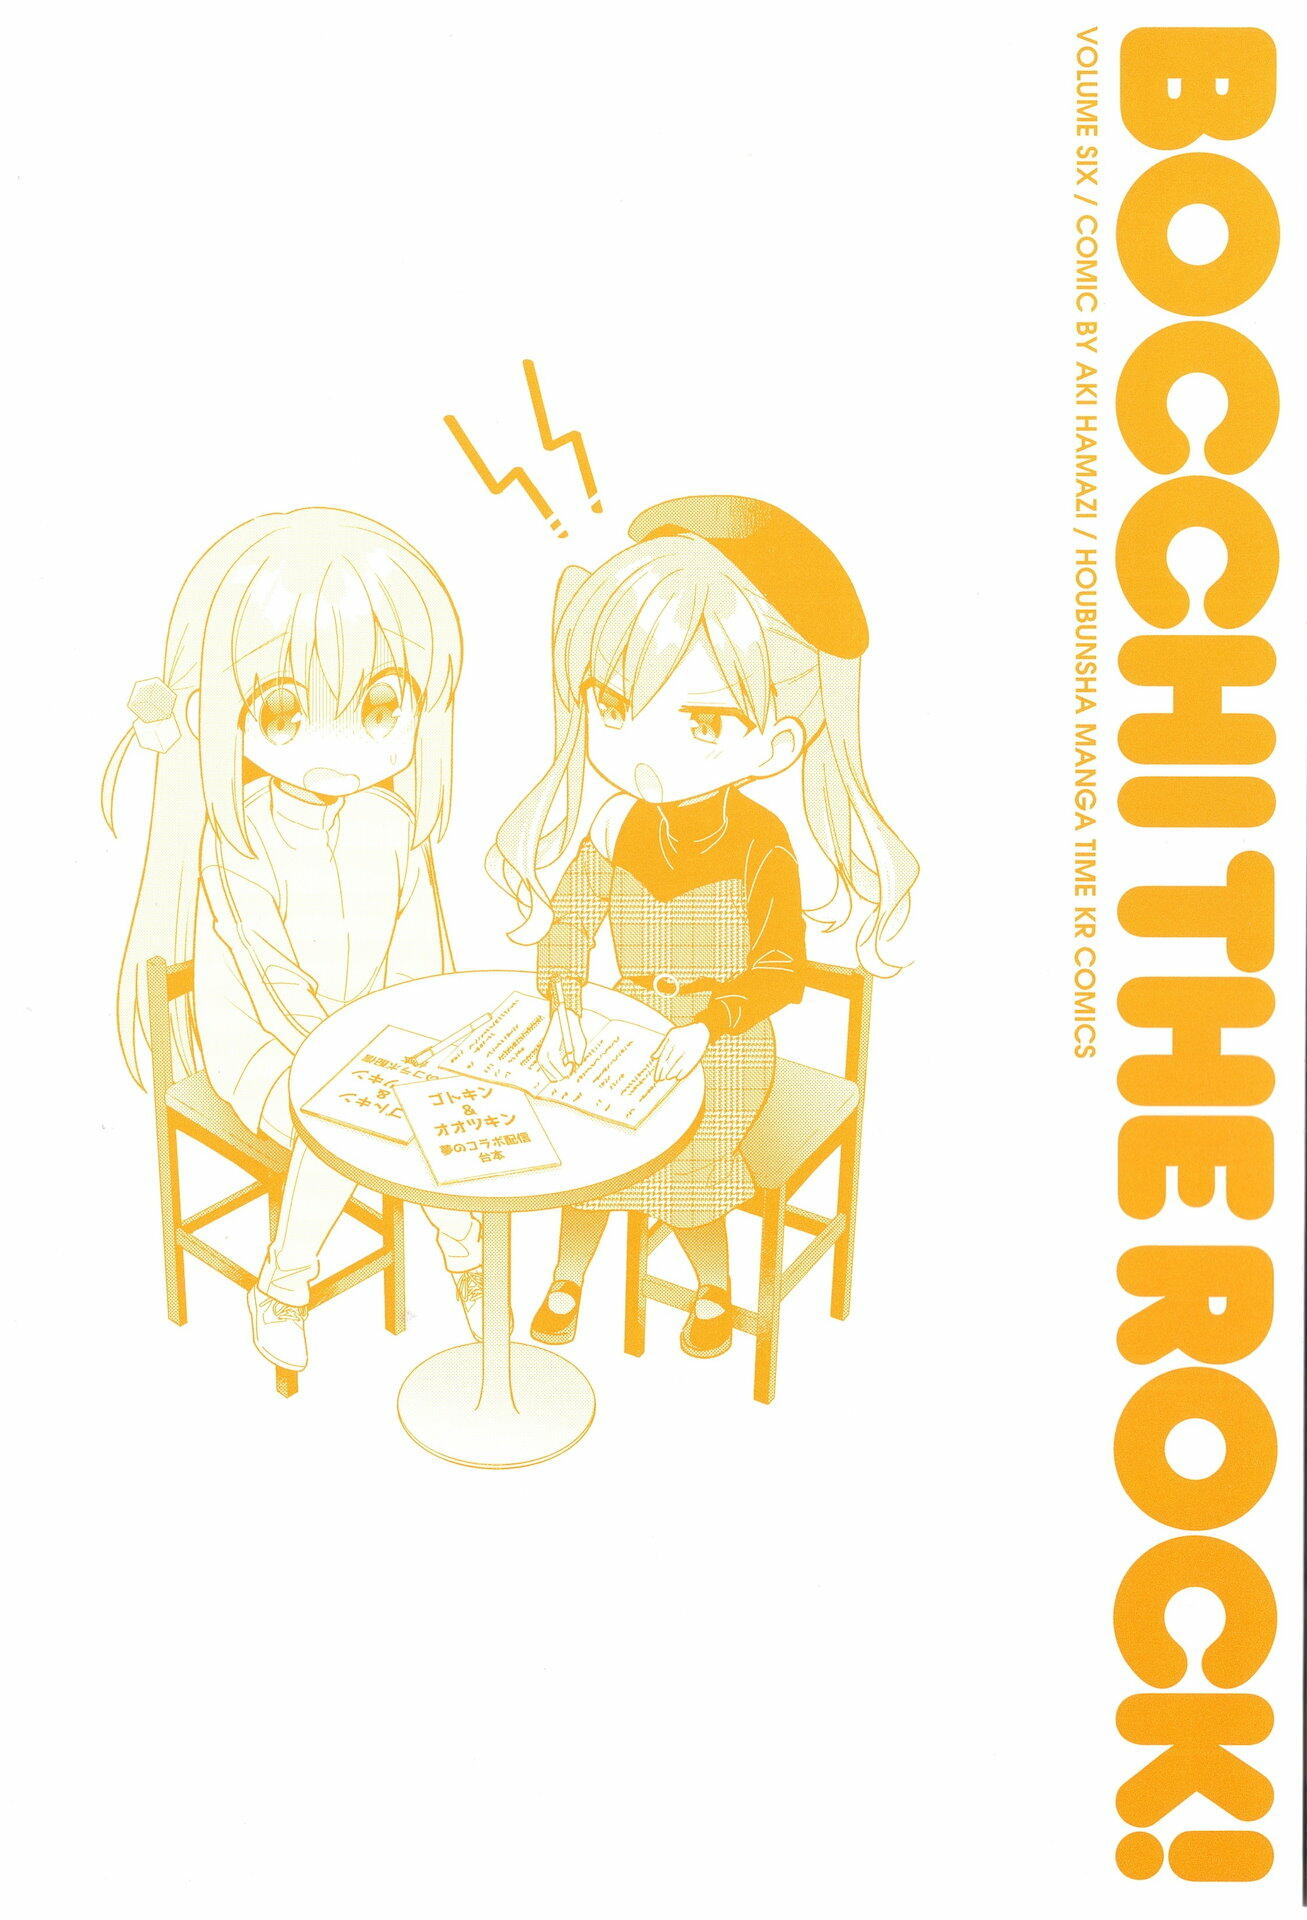 Bocchi The Rock Vol.6 Chapter 69.5: Volume 6 Extras page 3 - 